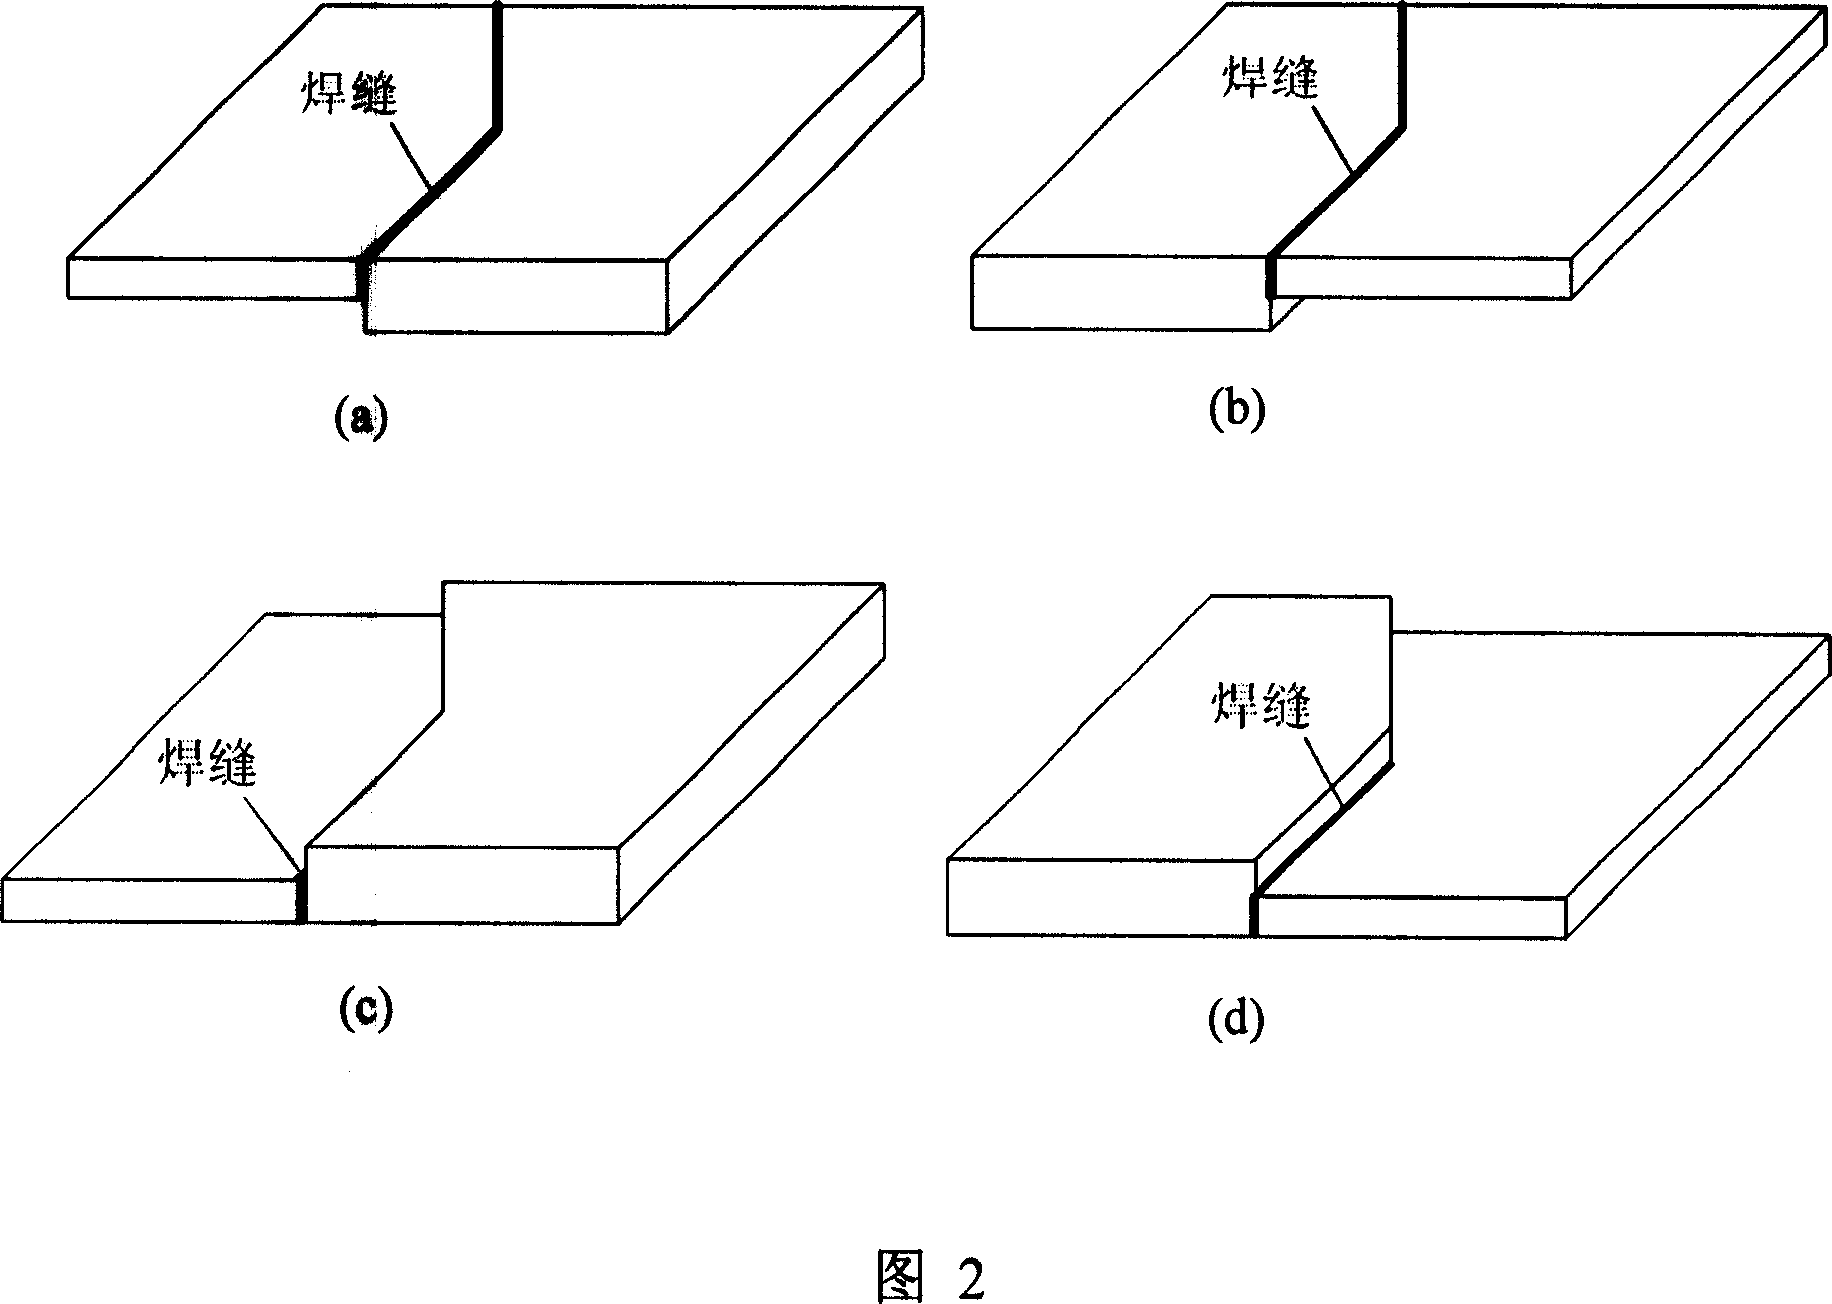 Deformable welding fixture for plate splicing welding with linear and curved weld seams